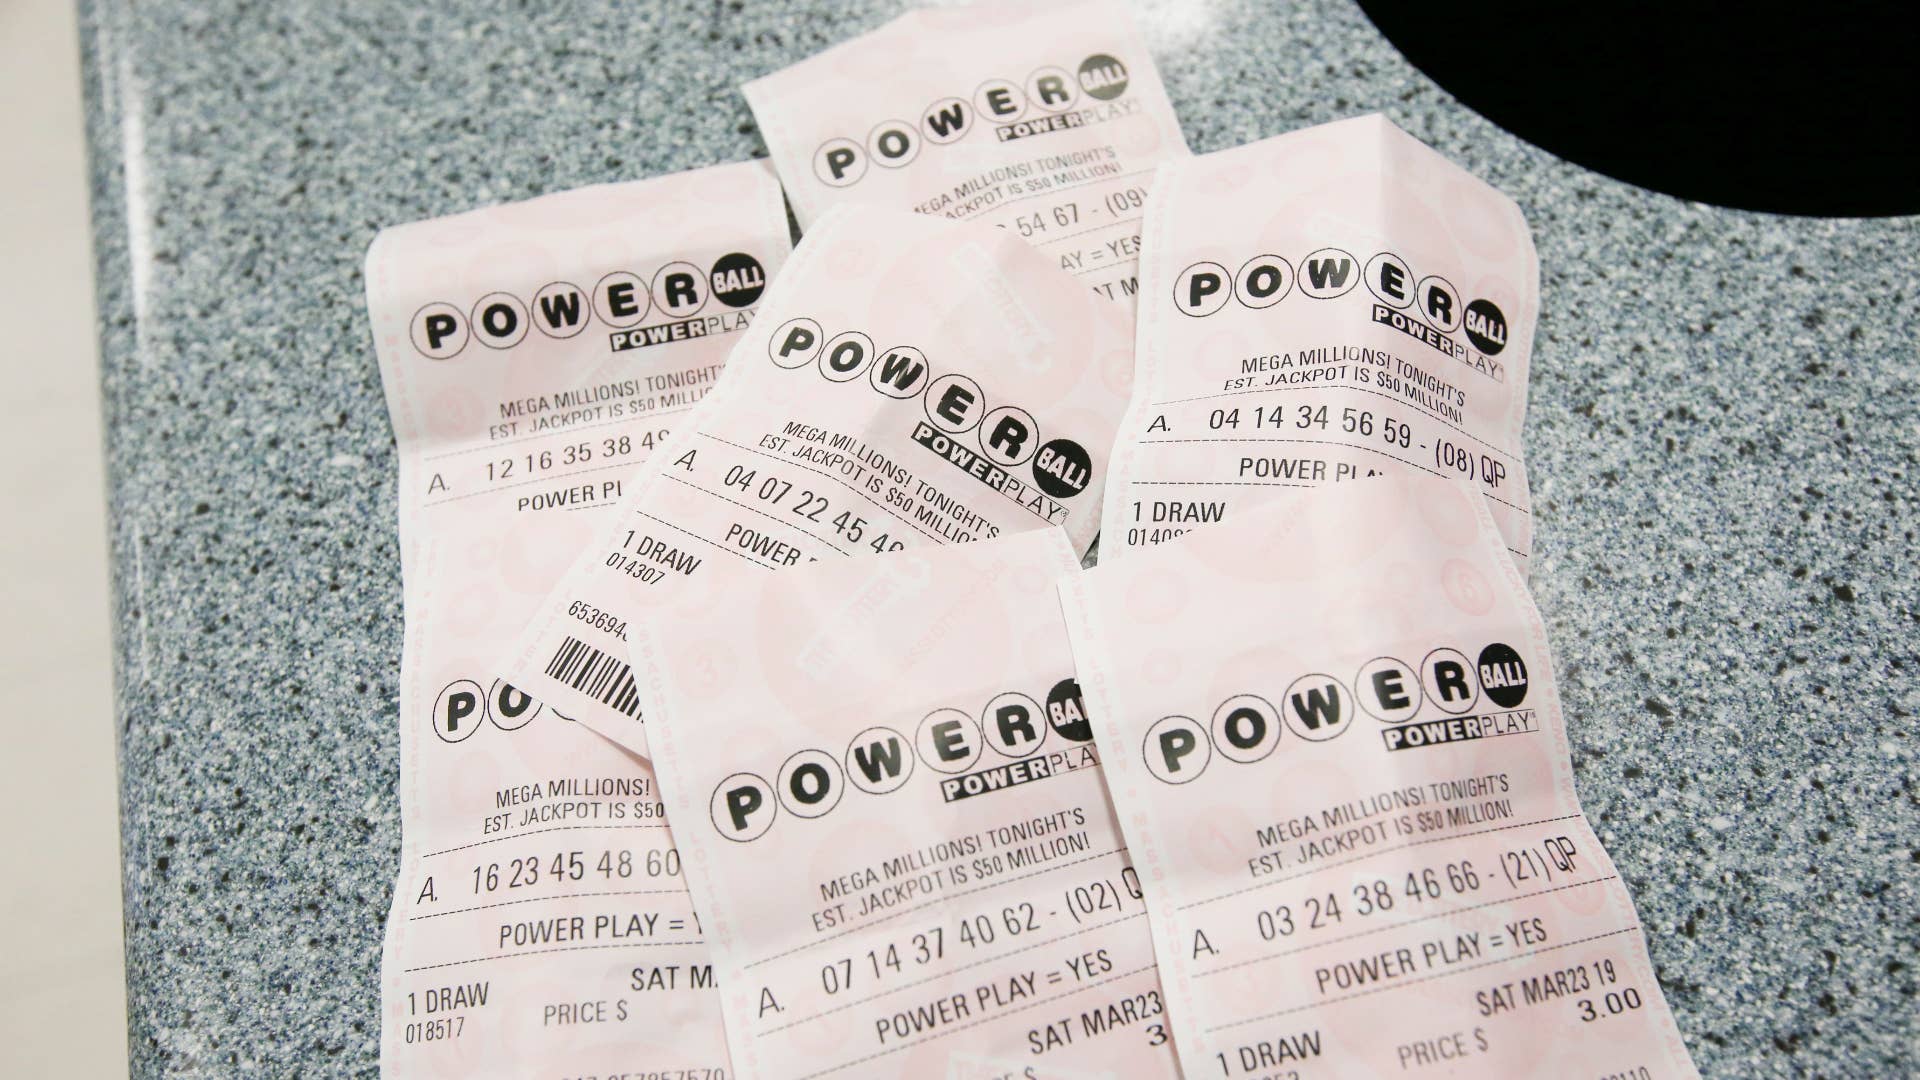 Powerball tickets at The Hub on Broadway.